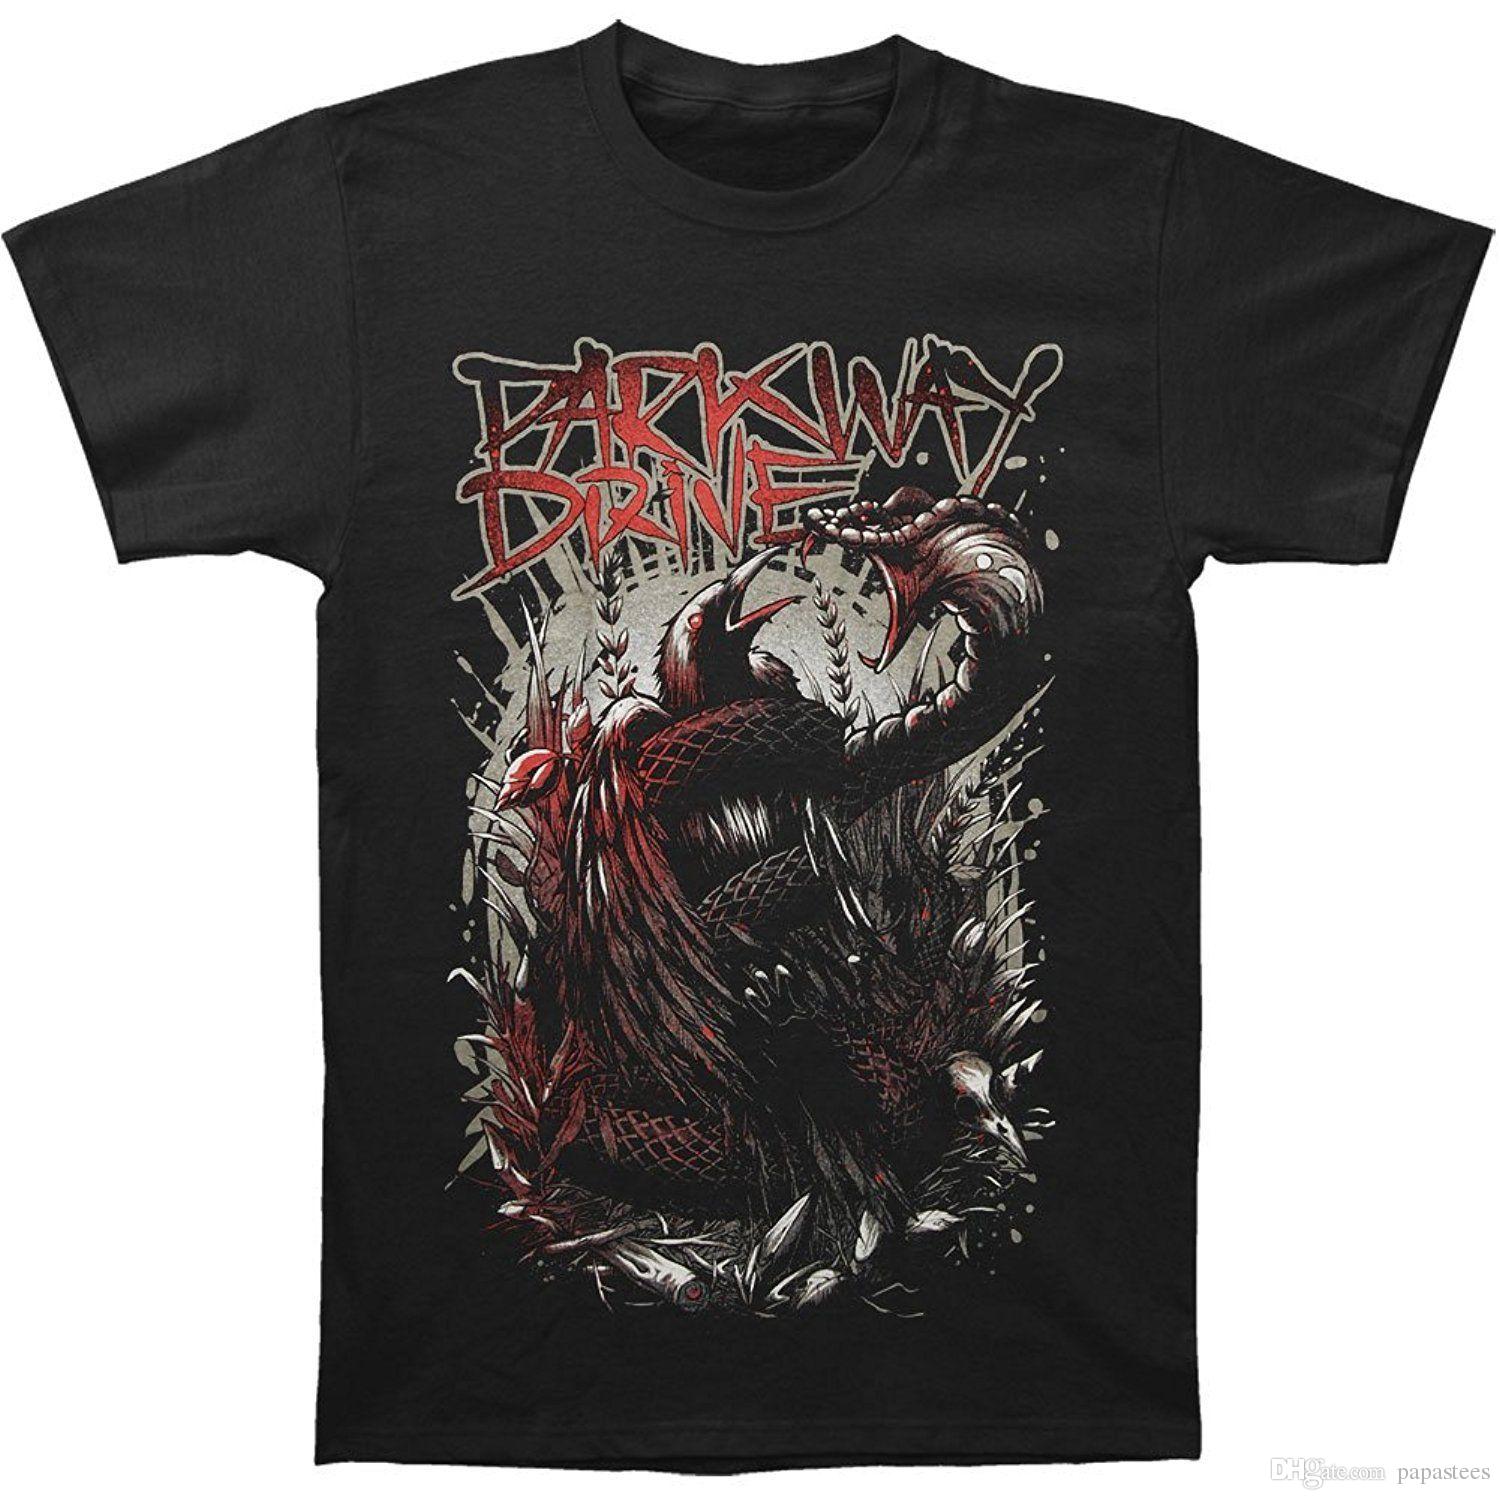 Parkway Drive Band Logo - Authentic PARKWAY DRIVE Band Snake Crow Fighting Logo T Shirt S M L ...